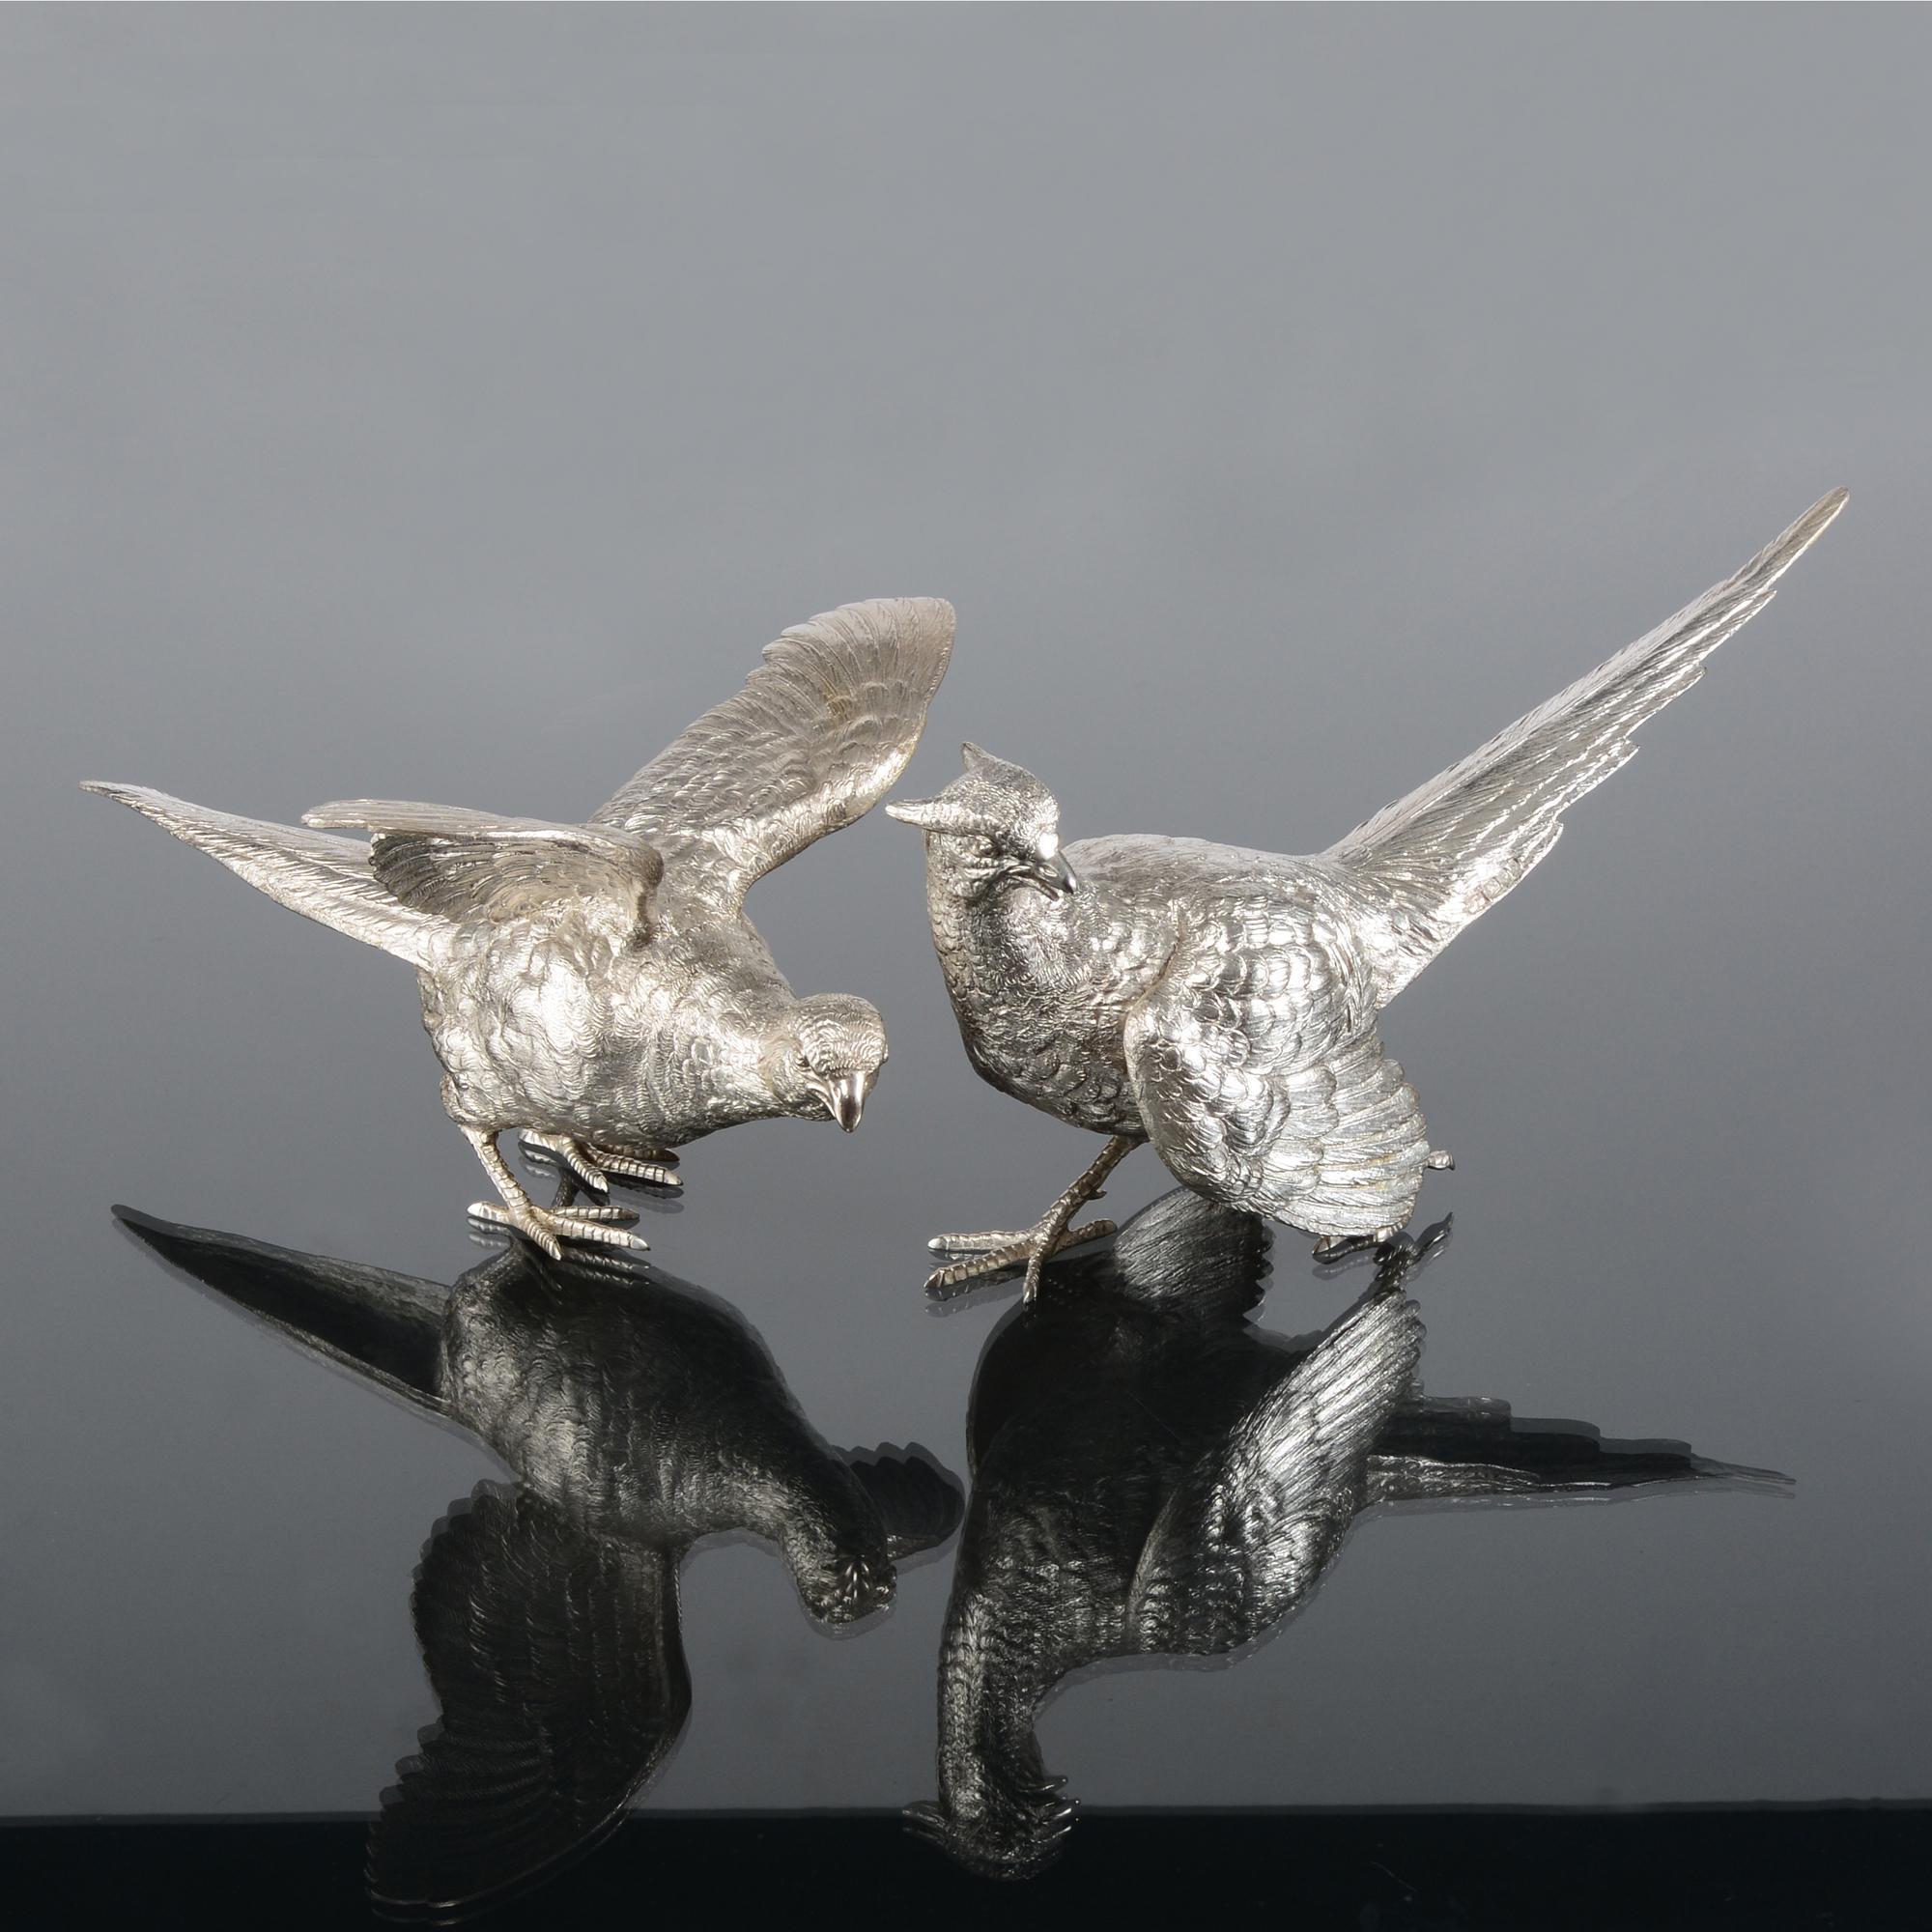 Made by Barnard Brothers for Mappin & Webb, this fine pair of silver pheasants are depicted in a classic pose. This silver cock and hen pheasant couple are particularly fine examples of silver game bird modelling, showing fine quality hand chasing